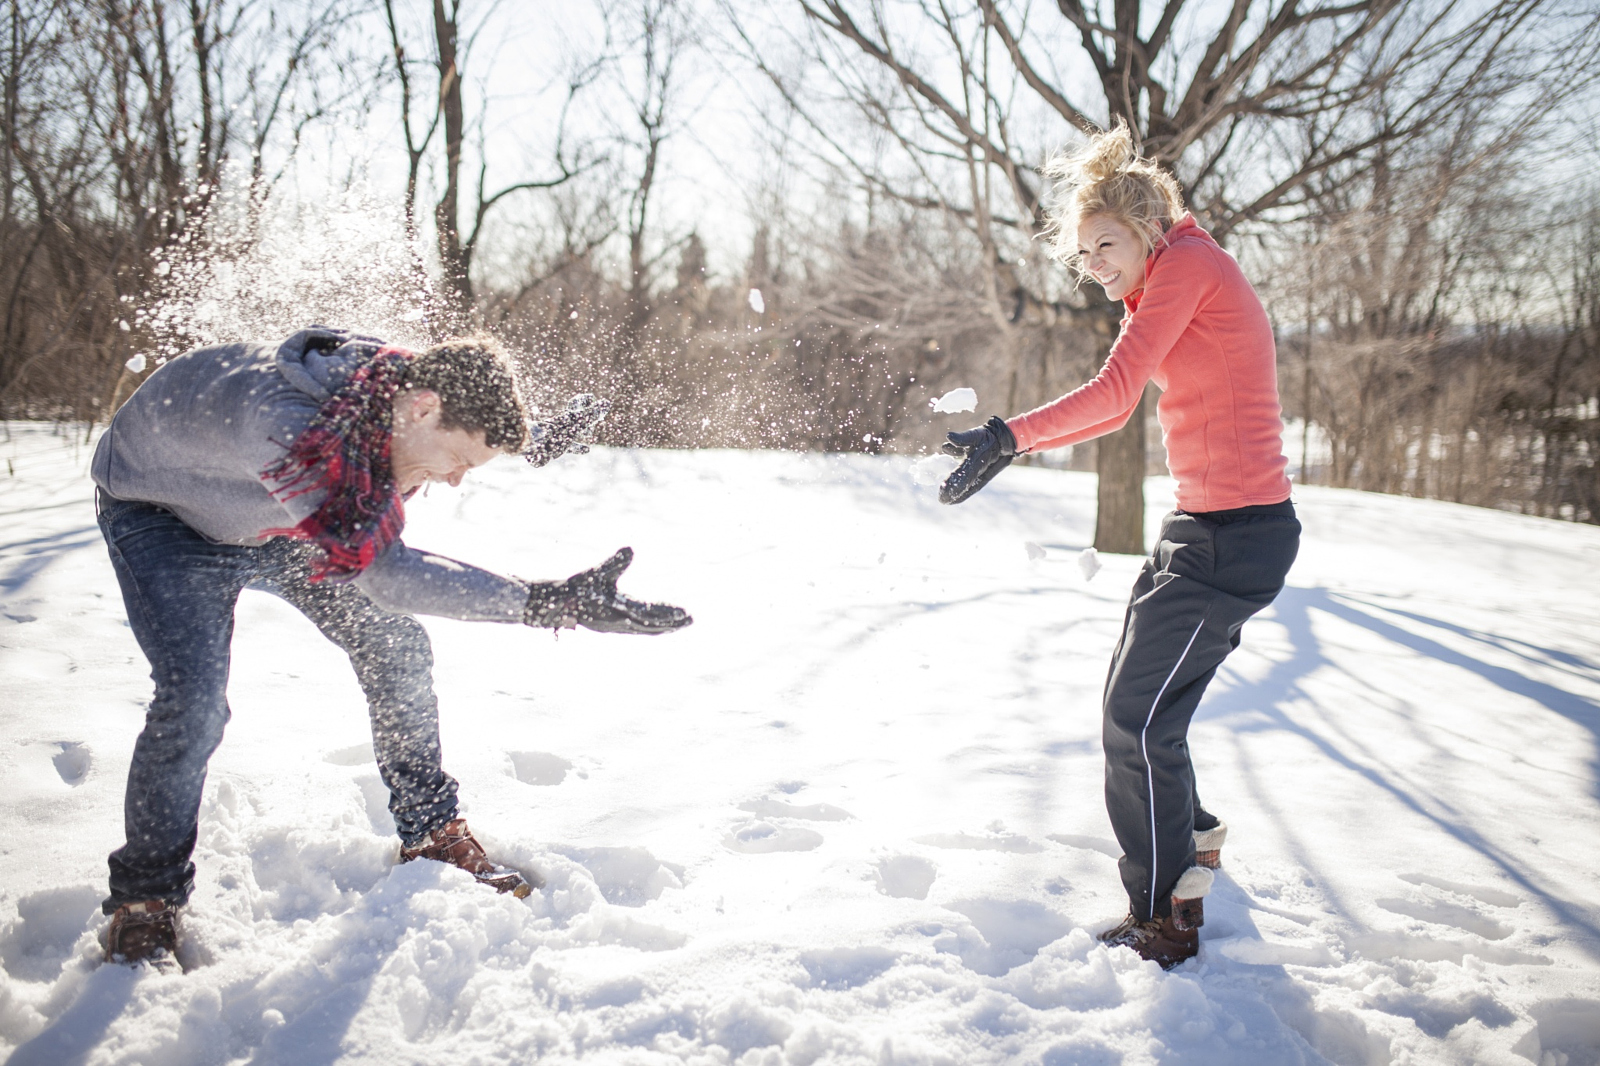 Simply Sellable: Why this Snowball Fight Photo Sells